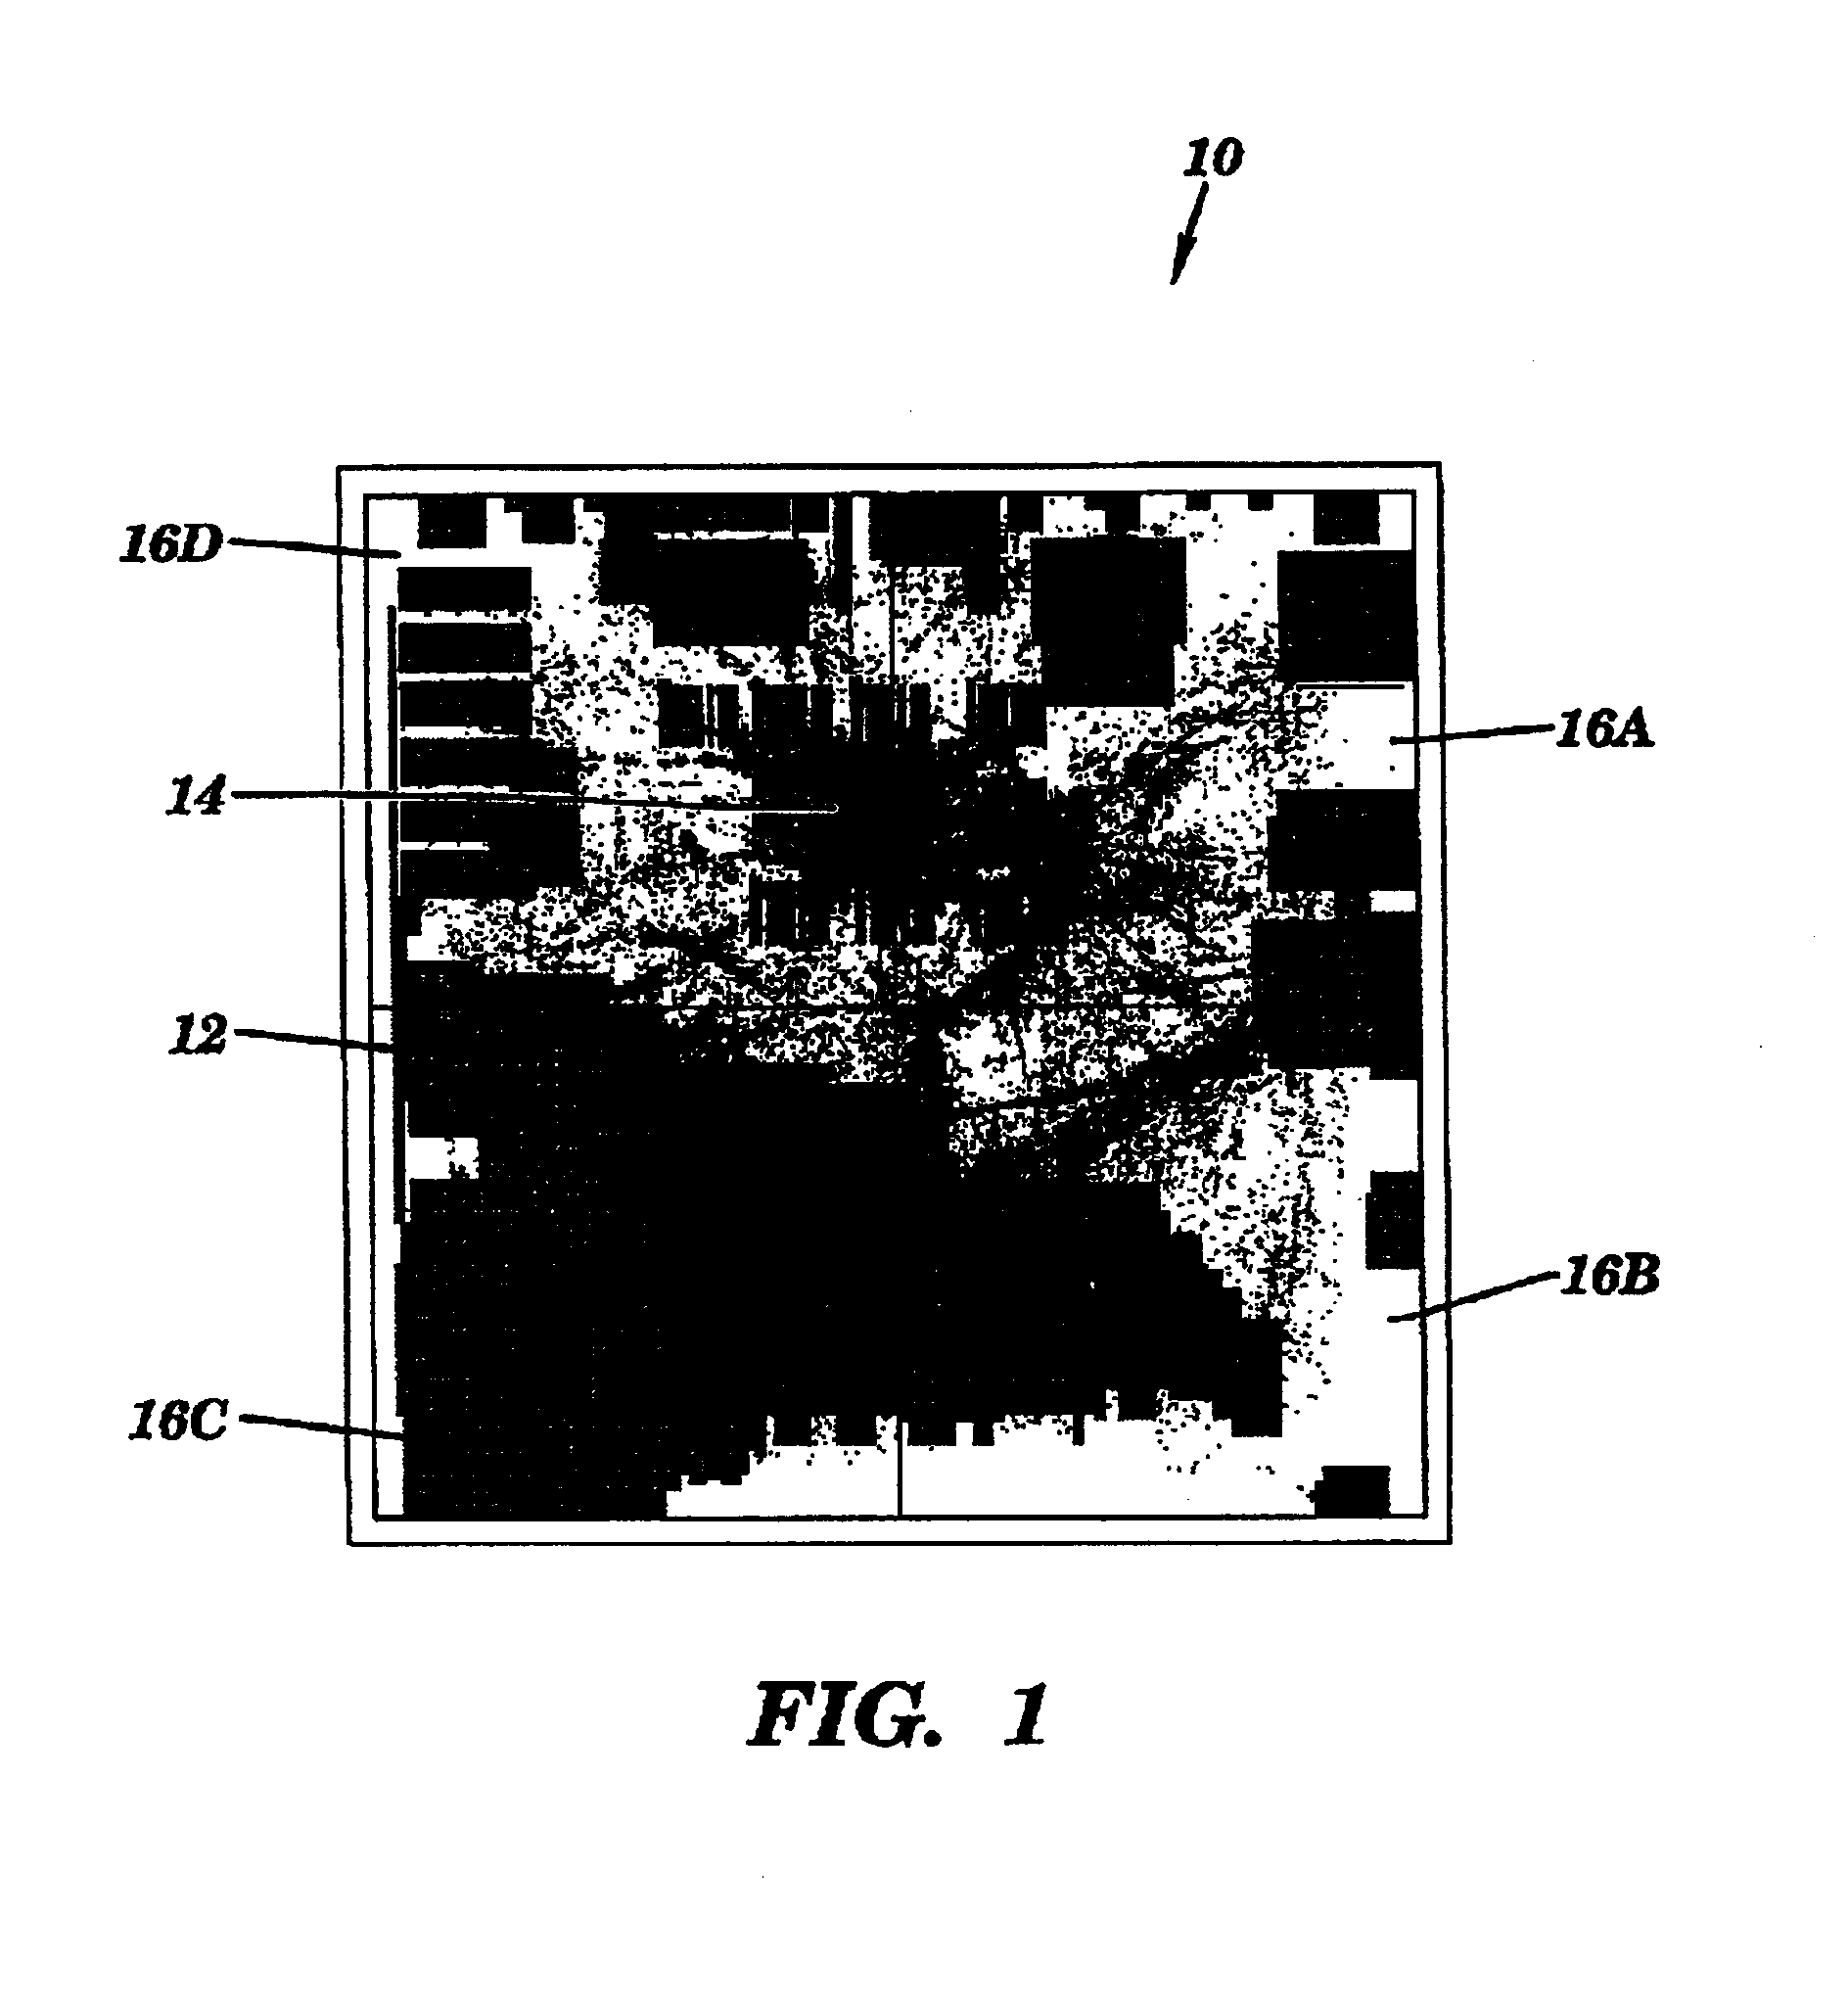 Method and system for placing logic nodes based on an estimated wiring congestion